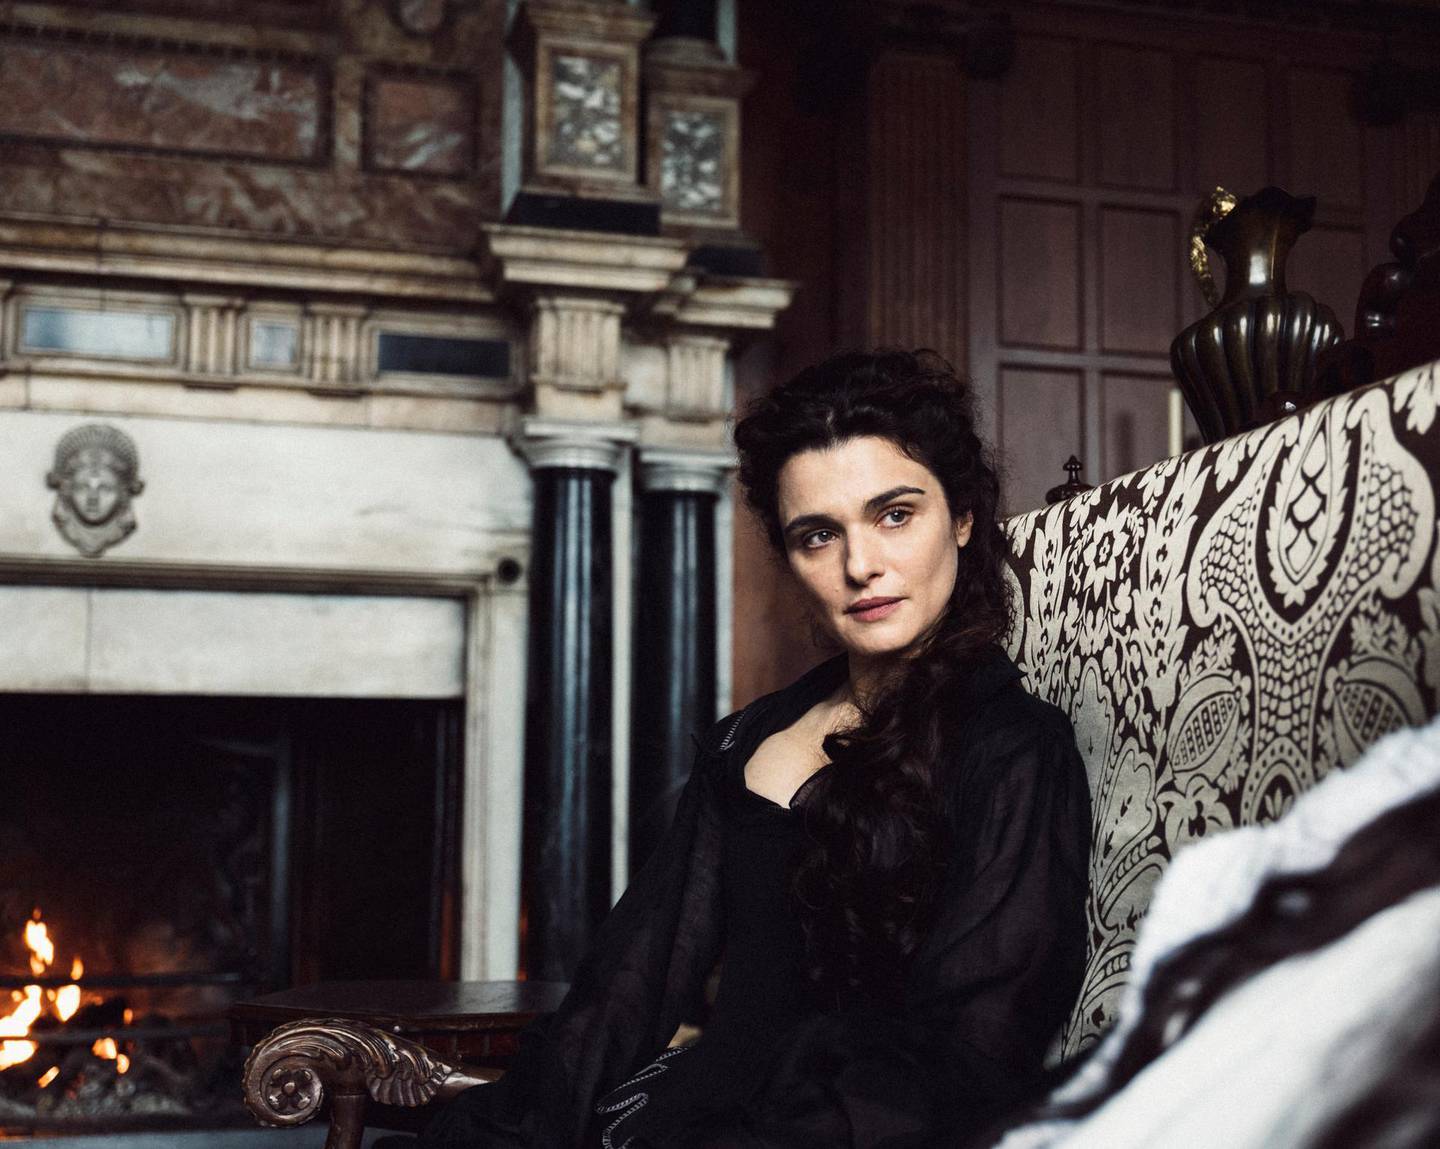 Rachel Weisz in 'The Favourite'. Courtesy The Favourite